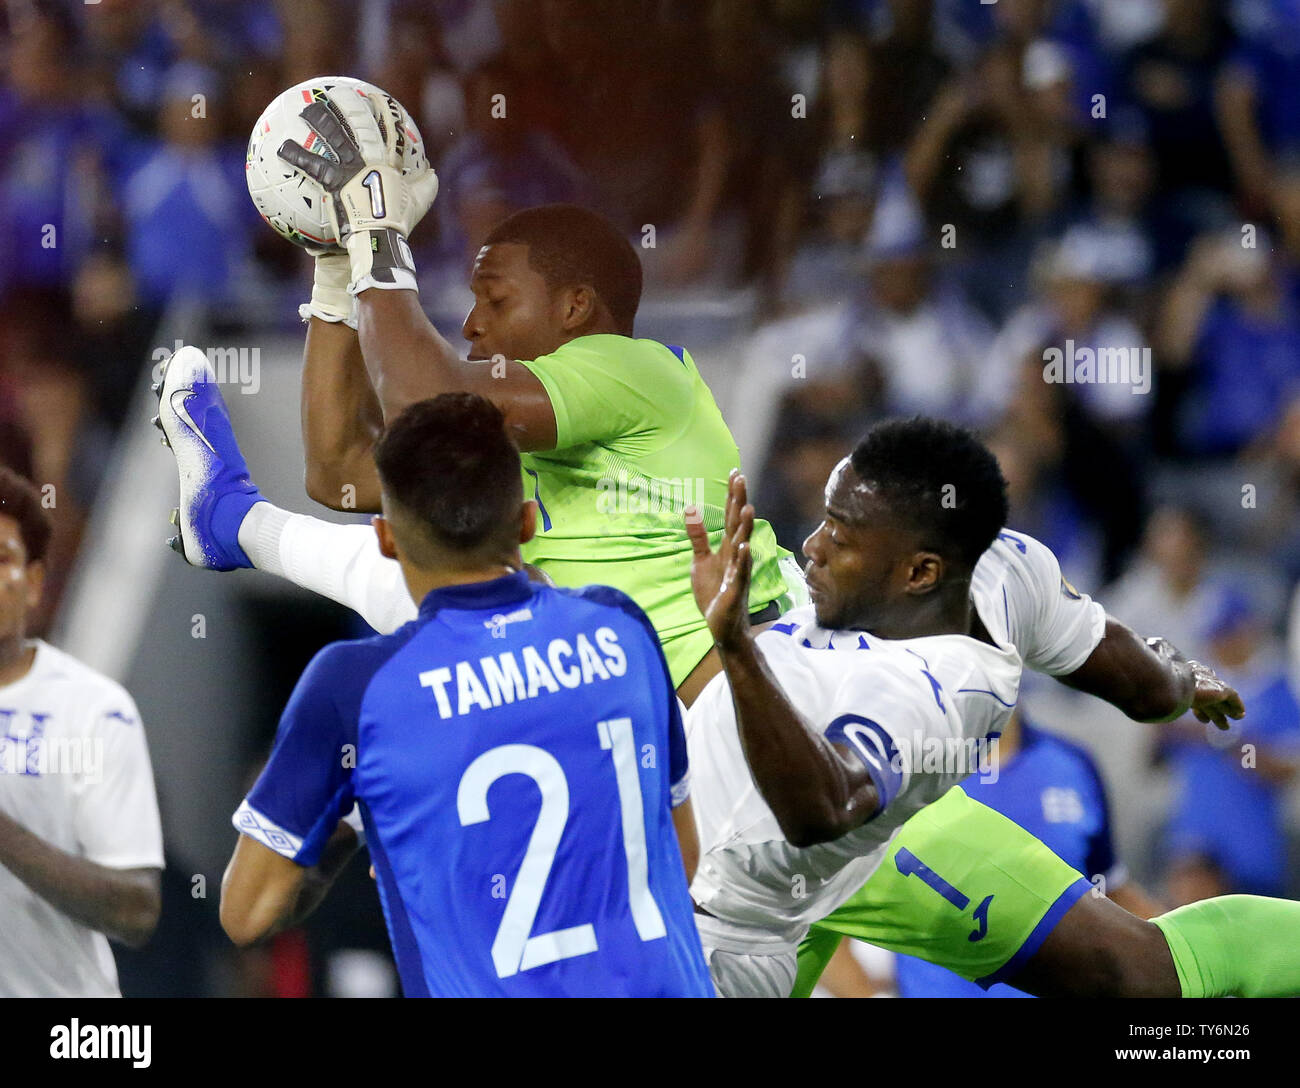 Los Angeles, California, USA. 25th June, 2019. Honduras goalkeeper Luis Lopez (1) makes a save during a CONCACAF Gold Cup soccer match between Honduras and El Salvador in Los Angeles, California, Tuesday, June 25, 2019. Honduras won 4-0. Credit: Ringo Chiu/ZUMA Wire/Alamy Live News Stock Photo